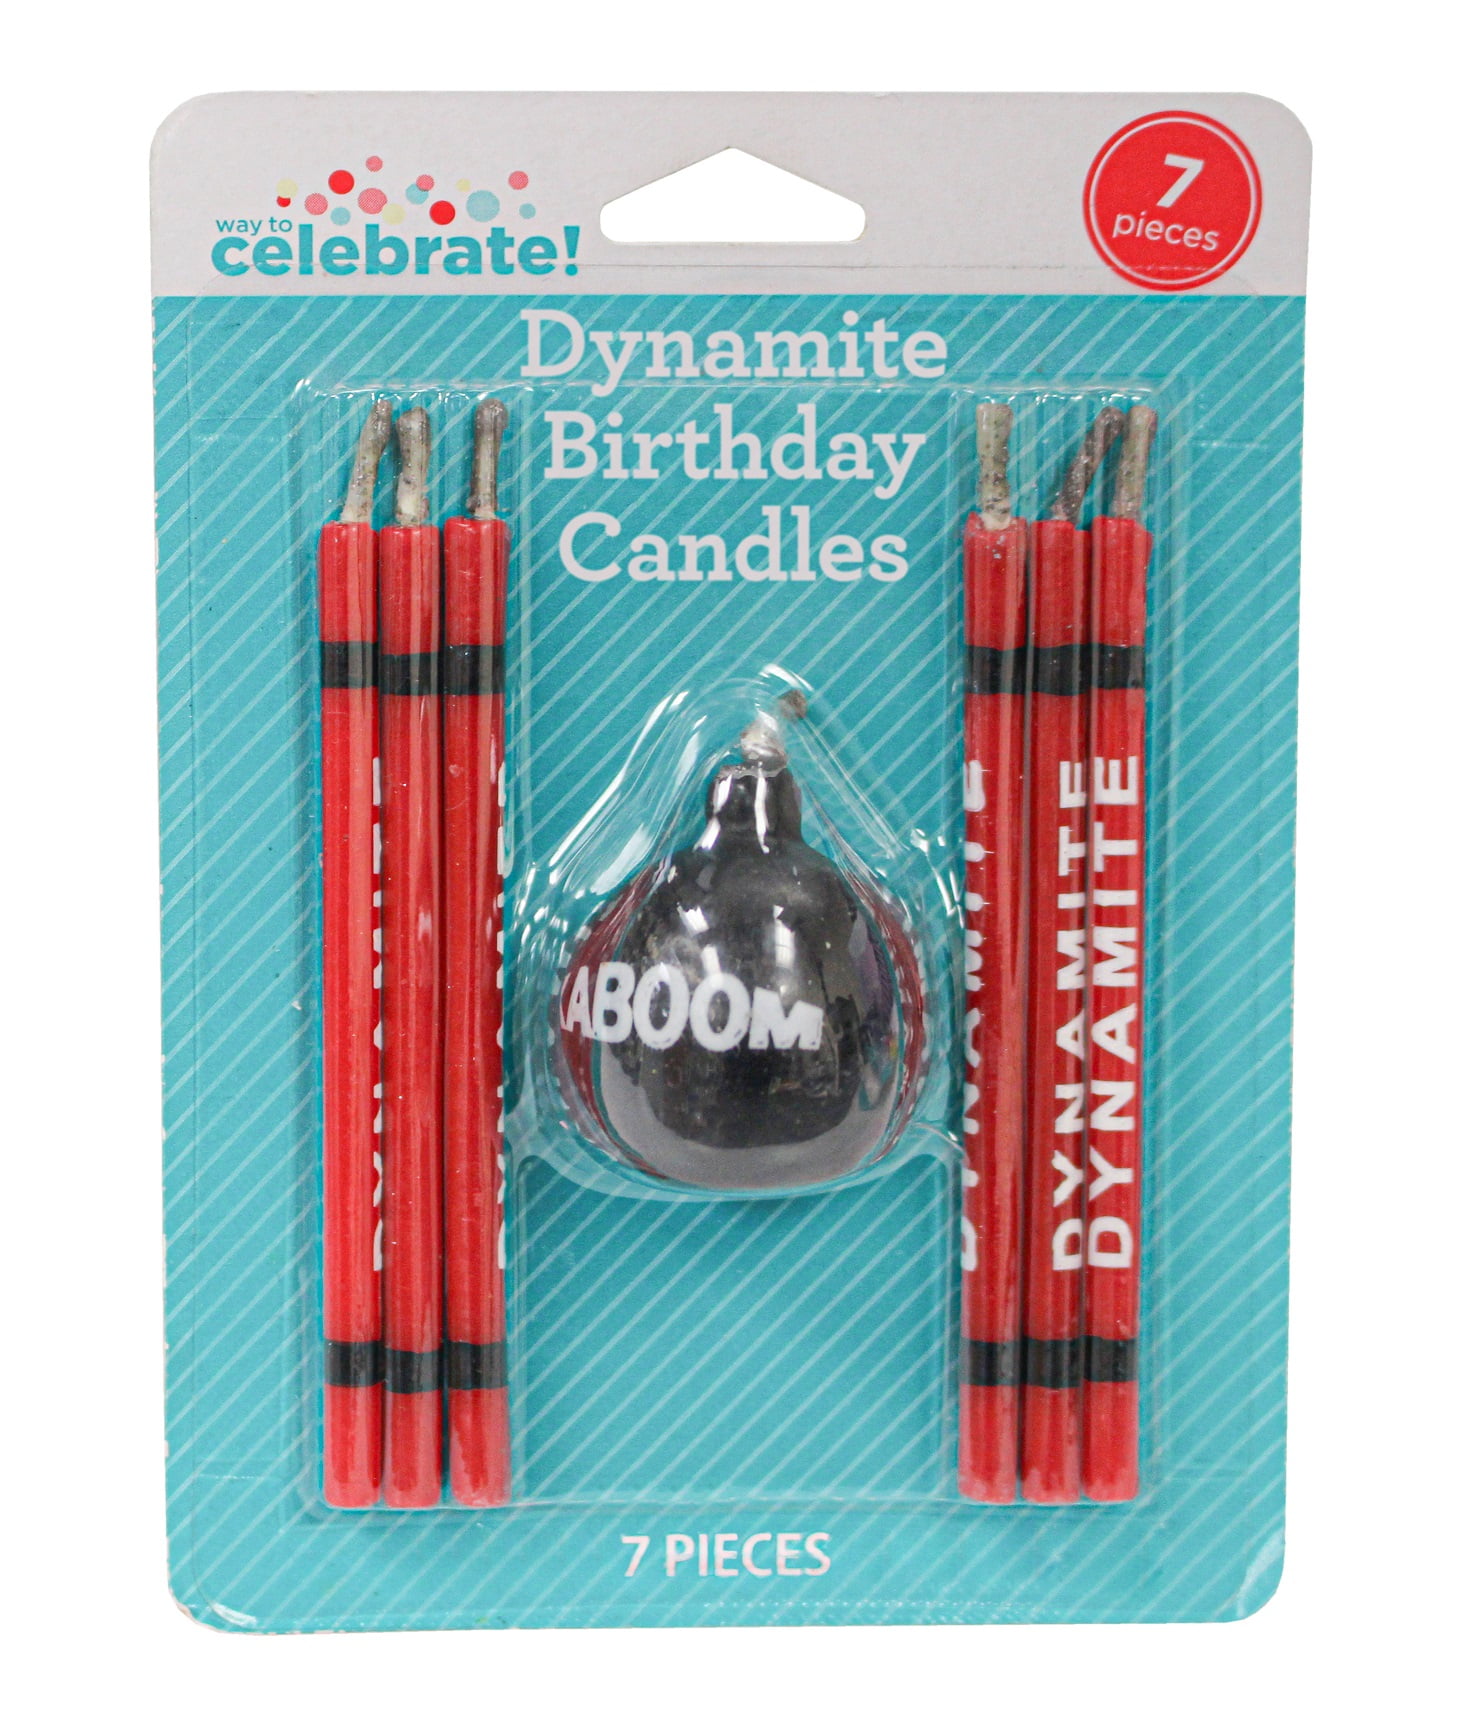 Way To Celebrate Birthday Candles, Assorted Colors, 7 Pieces